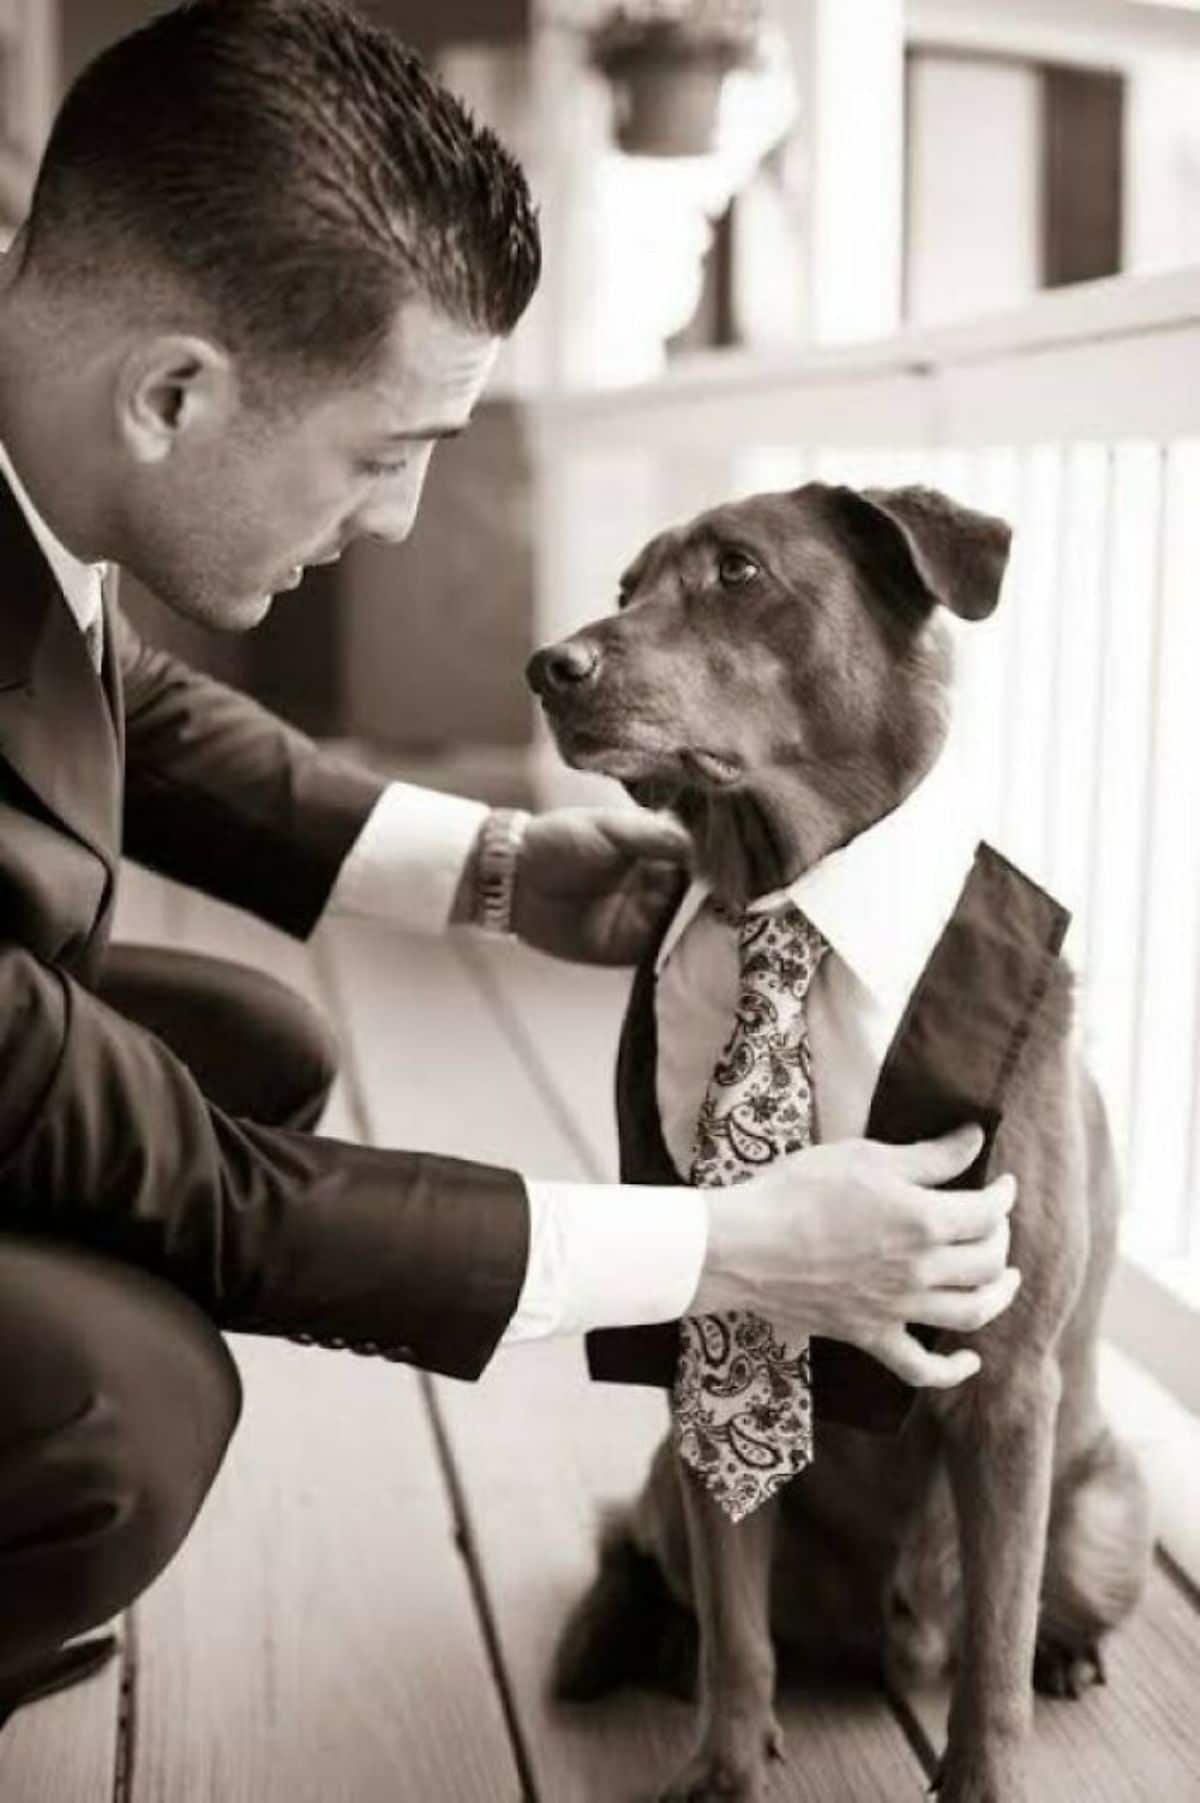 black and white photo of a black dog in a suit and tie looking at a man in a suit and tie